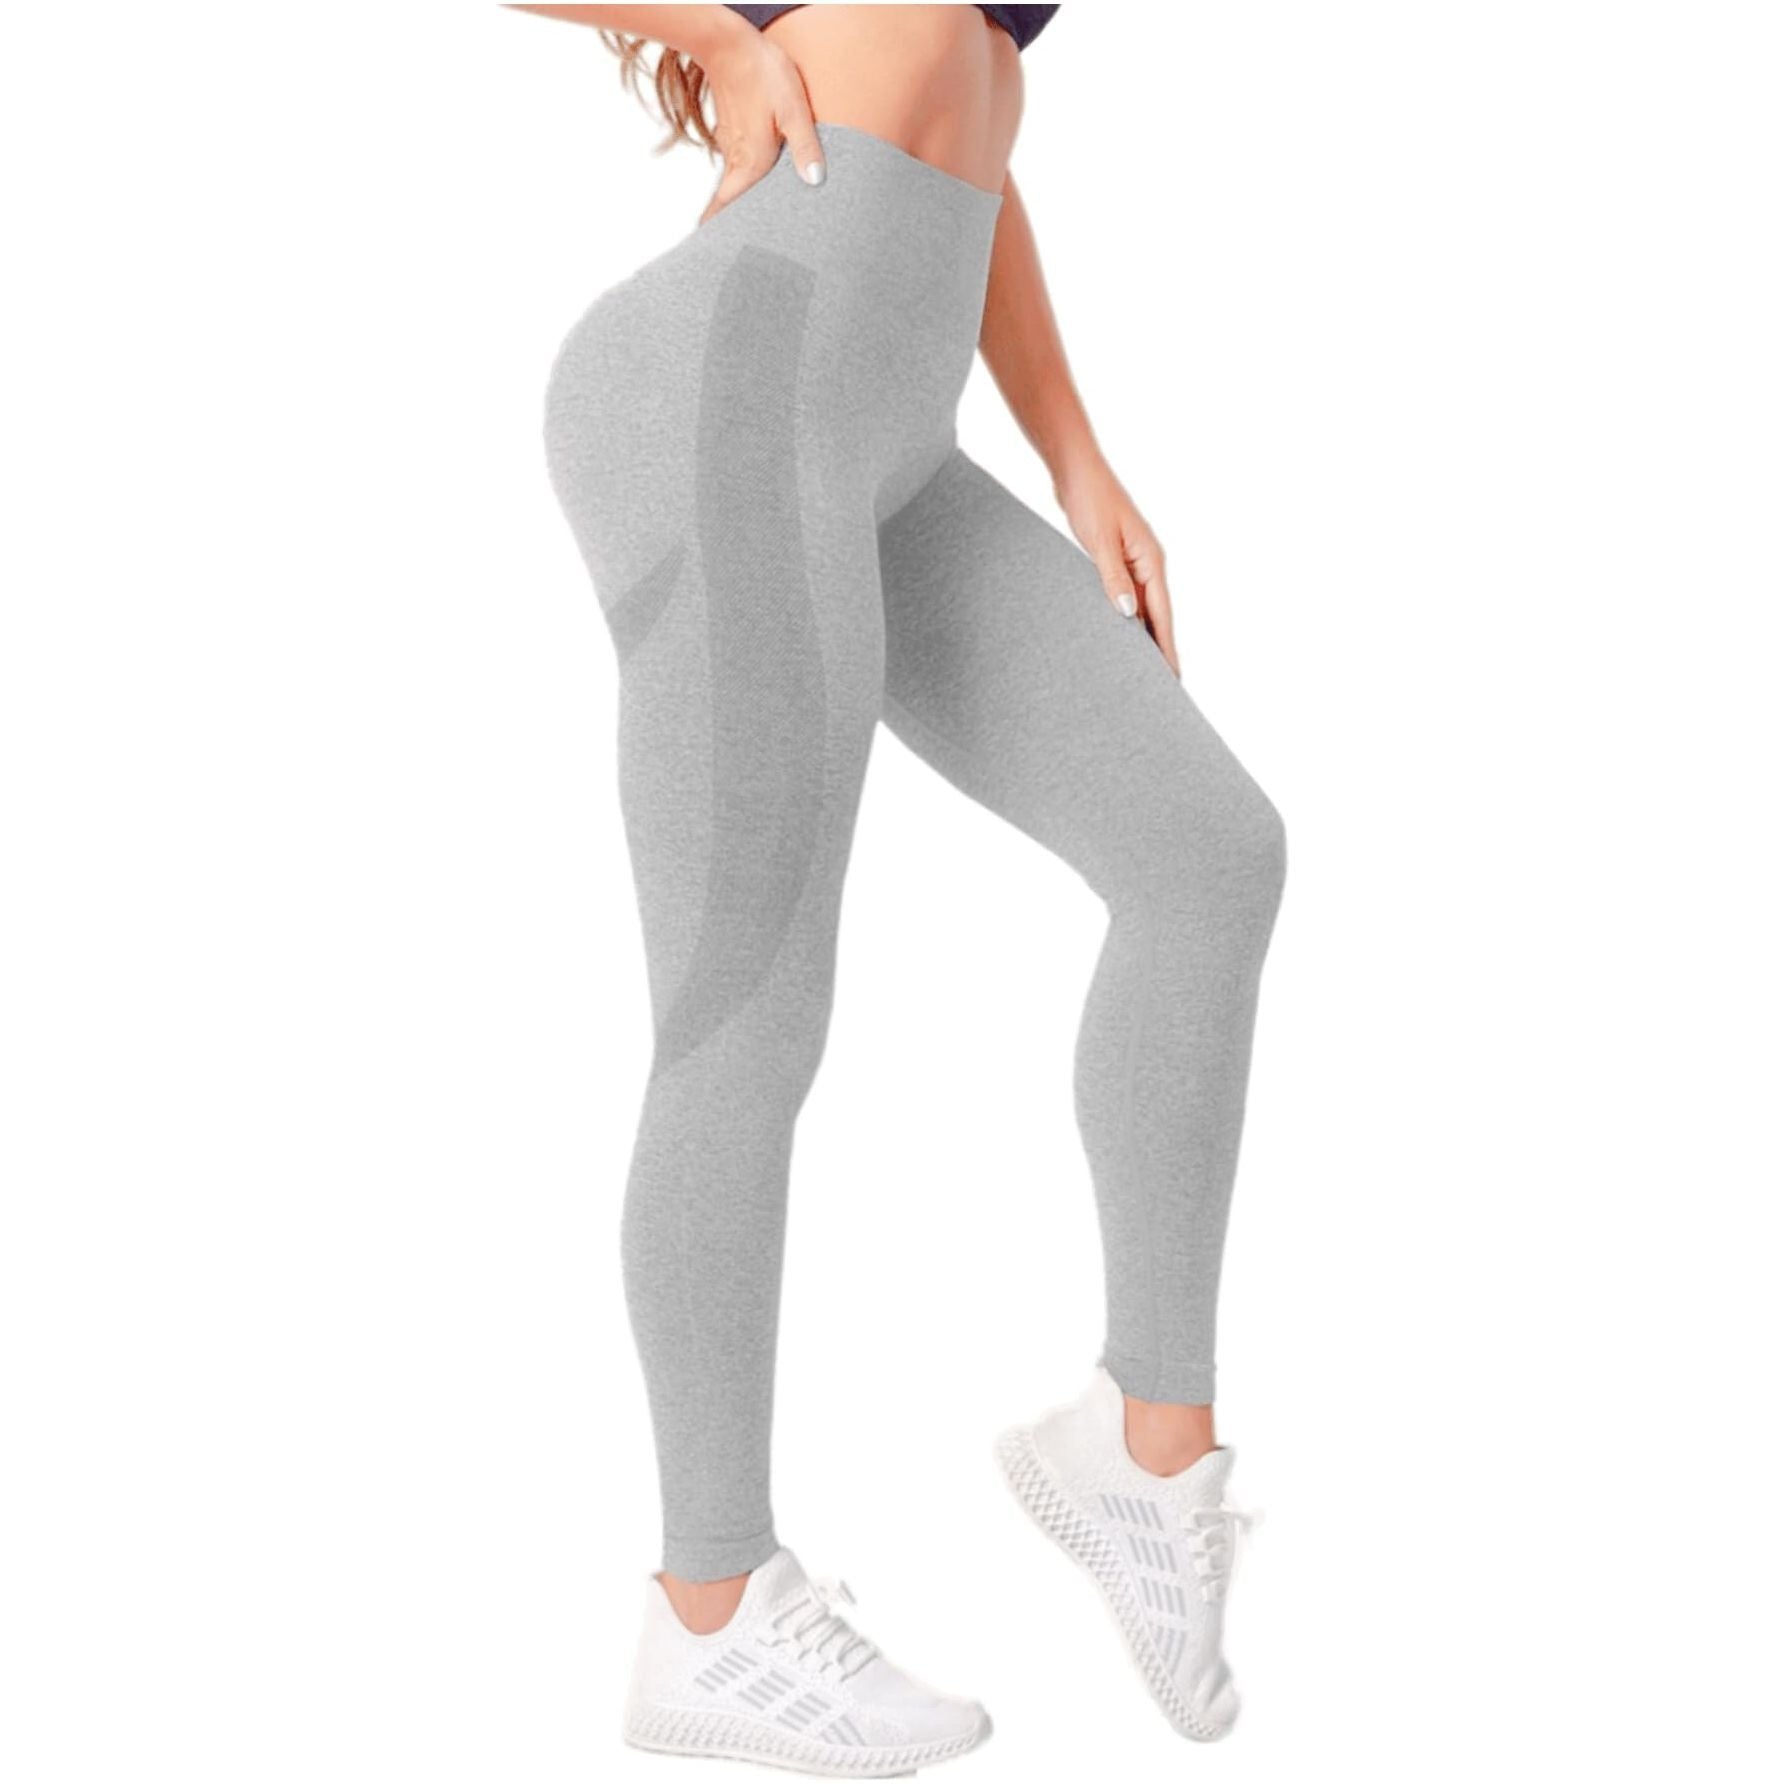 Yoga Pants High Waist Leggings Smile Contour Sport Pants Seamless Tummy Control Scrunch Butt Lift Stretchable Tights Waist Compression Fitness Gym for Women